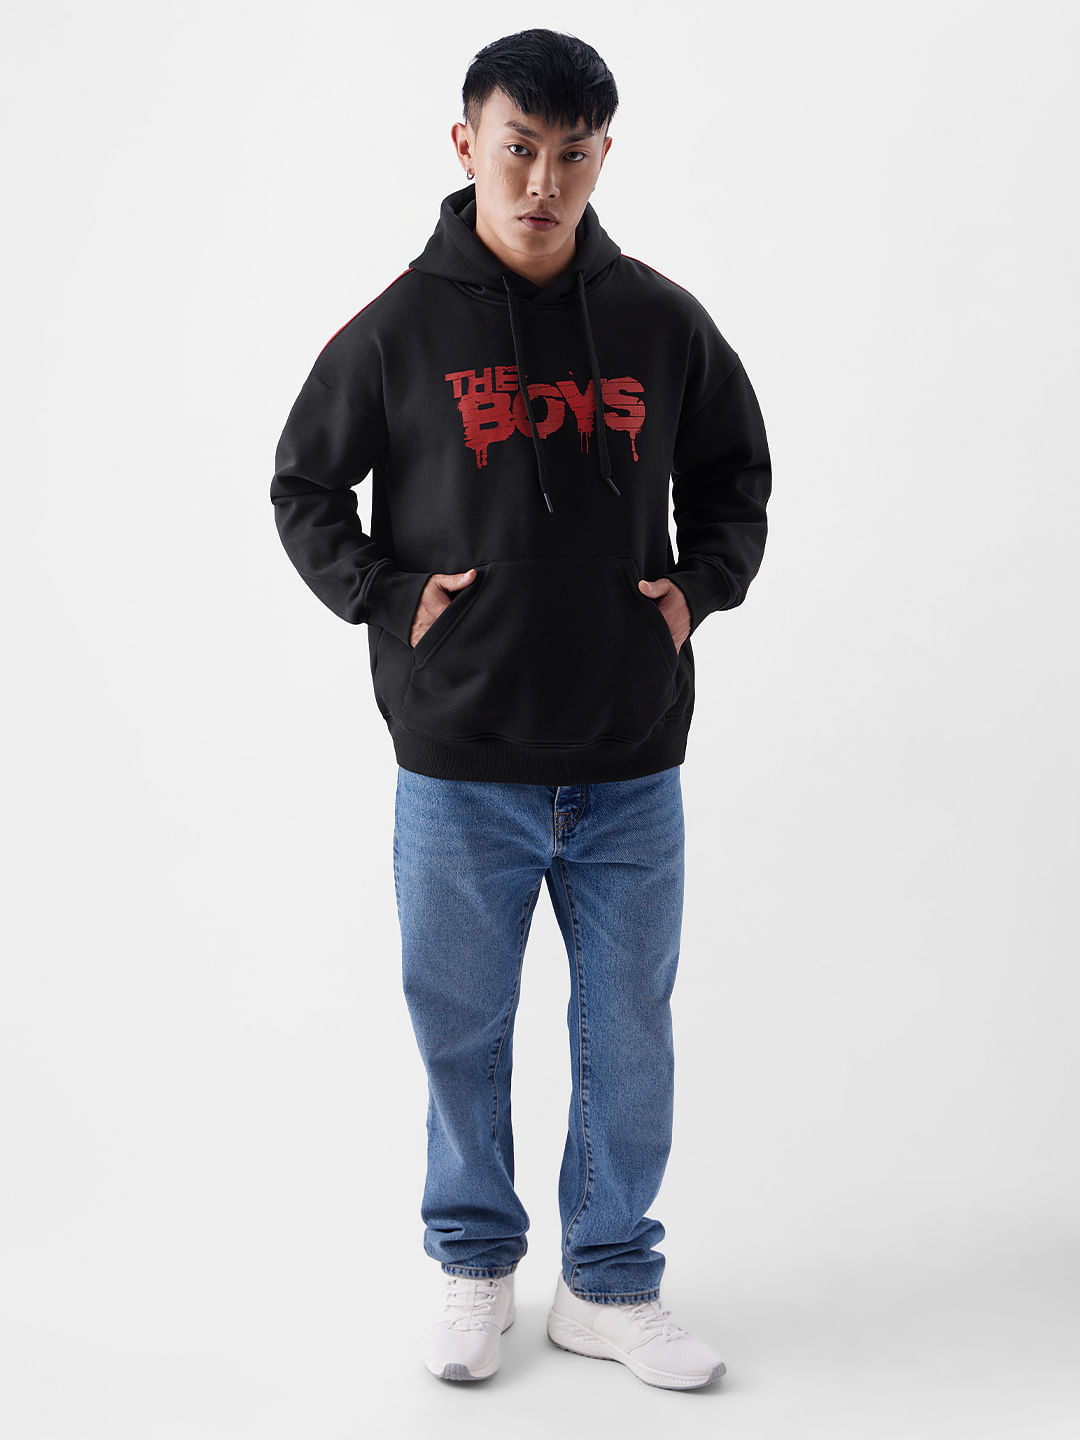 Buy The Boys: Official Logo Mens Oversized Hoodies Online